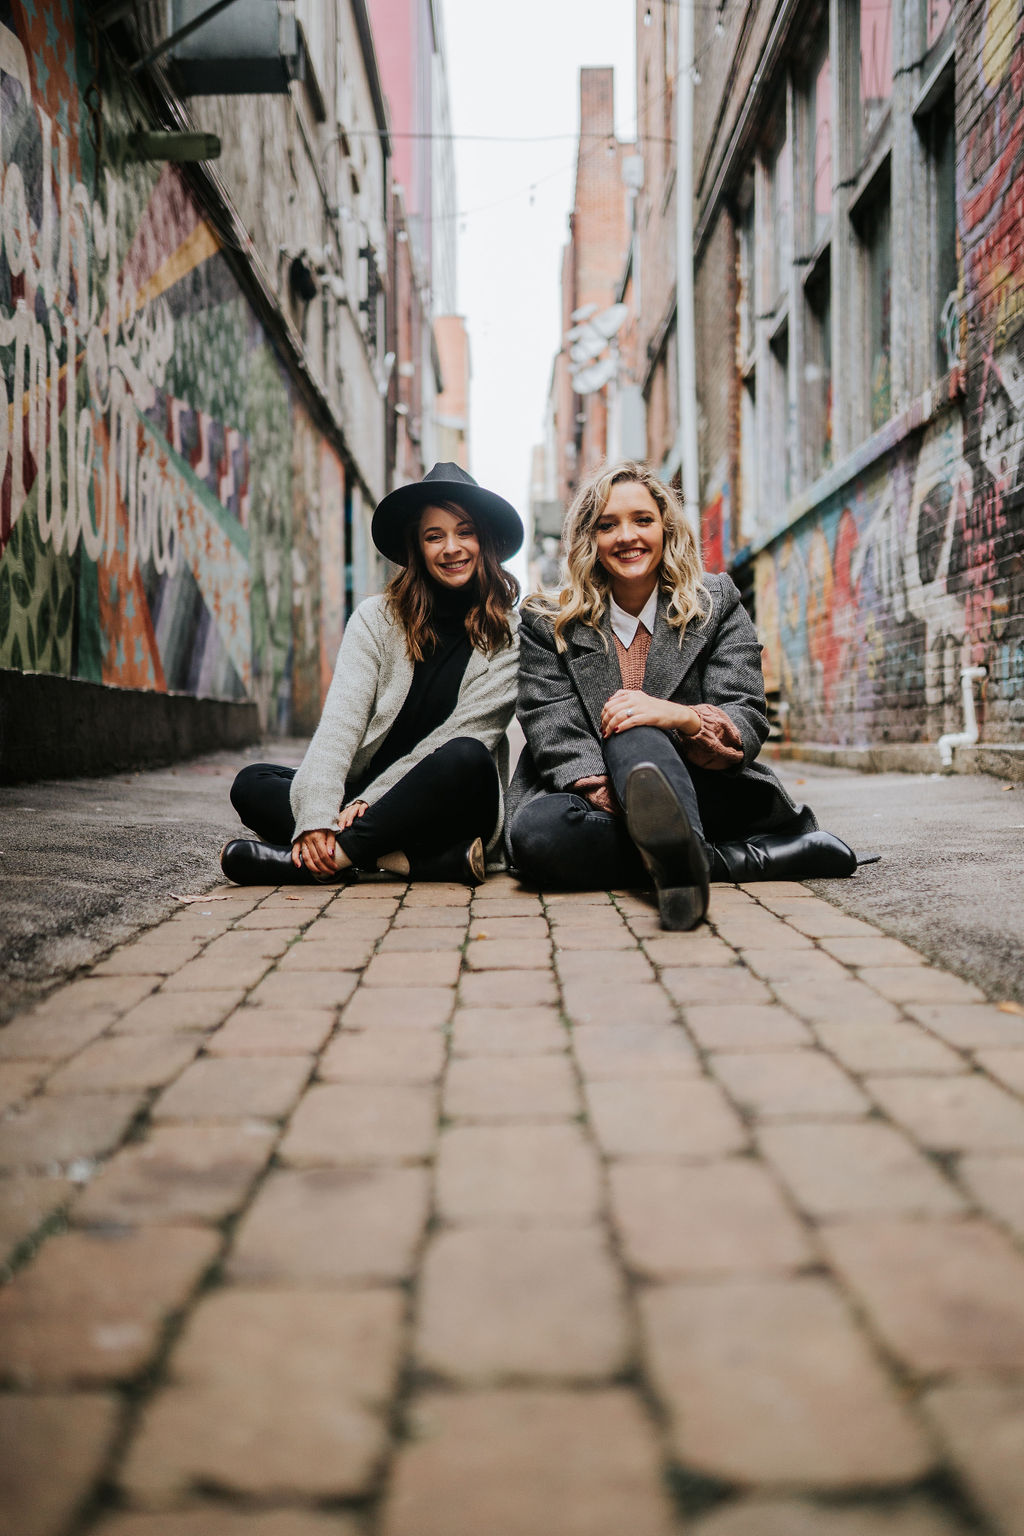 Celine and Anna from Novelbound a comedy book podcast sitting on cobblestone walkway in downtown knoxville laughing during novelbound podcast shoot